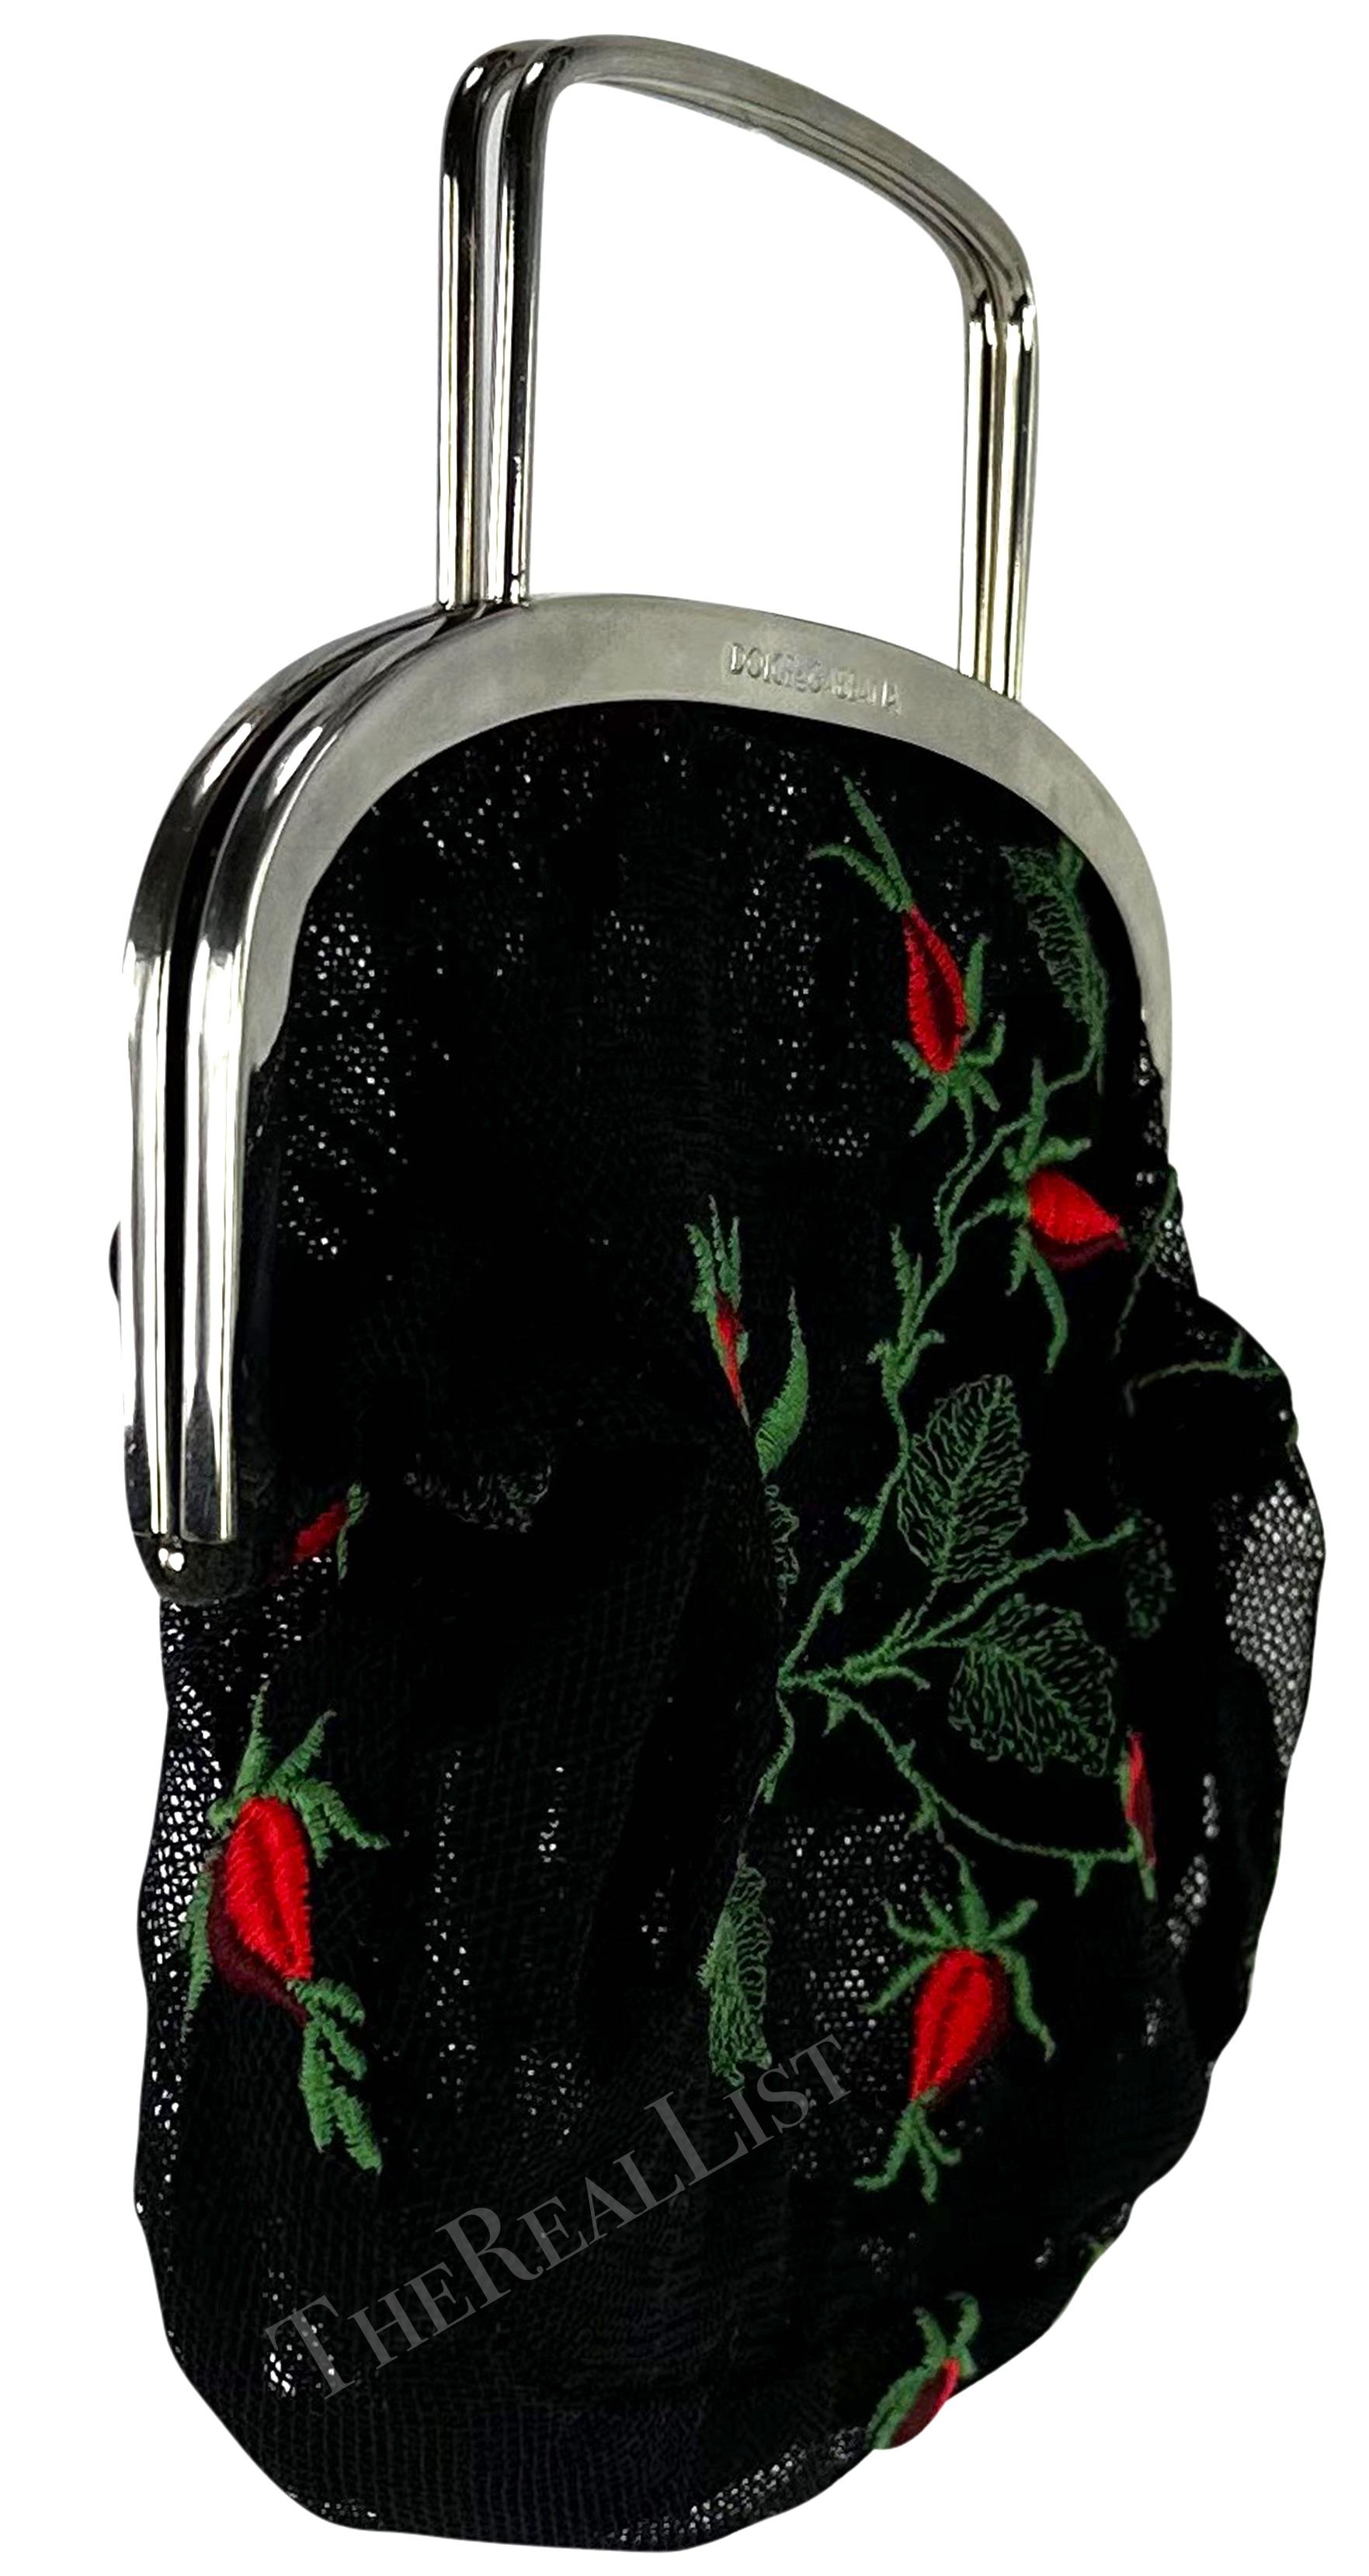 1990s Dolce & Gabbana Black Mesh Red Embroidered Floral Mini Evening Bag For Sale 5